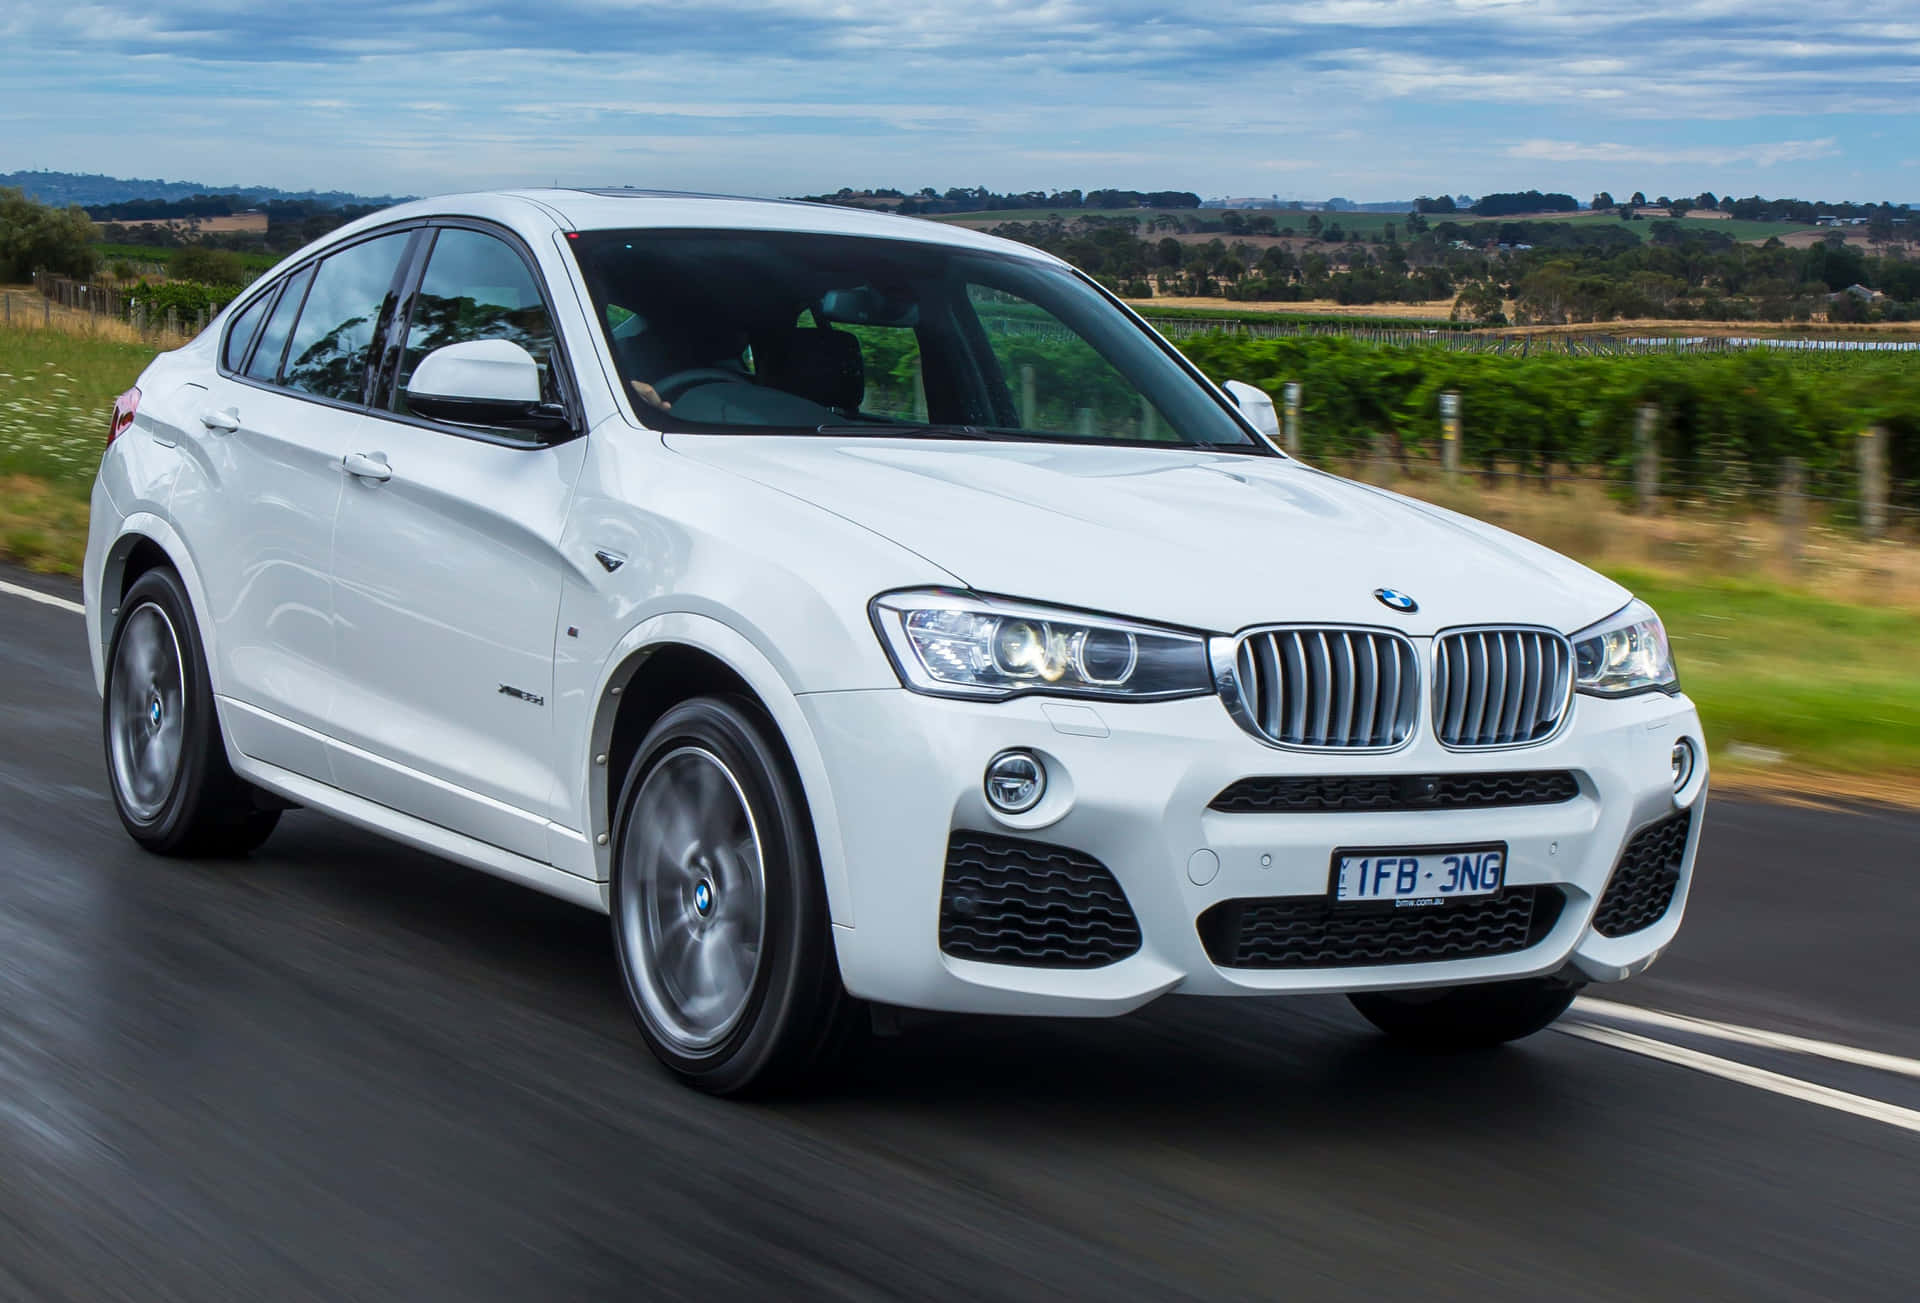 Stunning BMW X4 in action on the open road Wallpaper